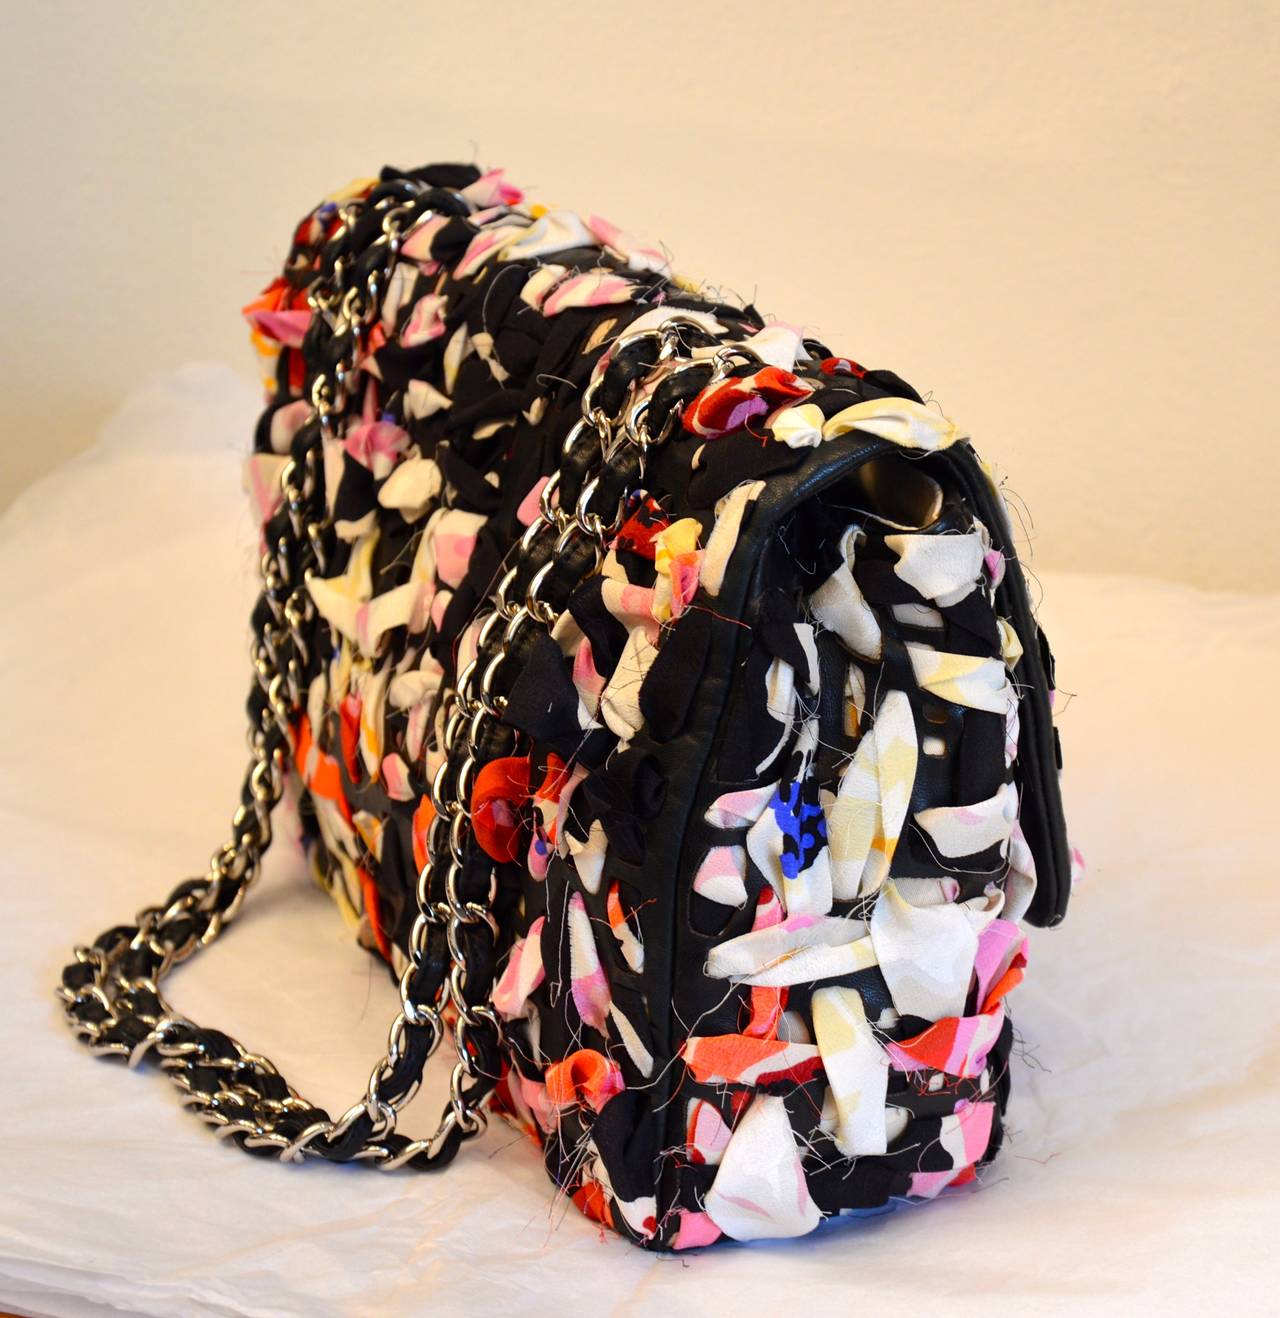 This is an authentic CHANEL XL Jumbo Flap in Vivid Colored Silk . This is a stunning large vintage flap bag that is beautifully crafted of black soft lambskin leather interlace with pastel and vivid colors. The bag features silver chain link